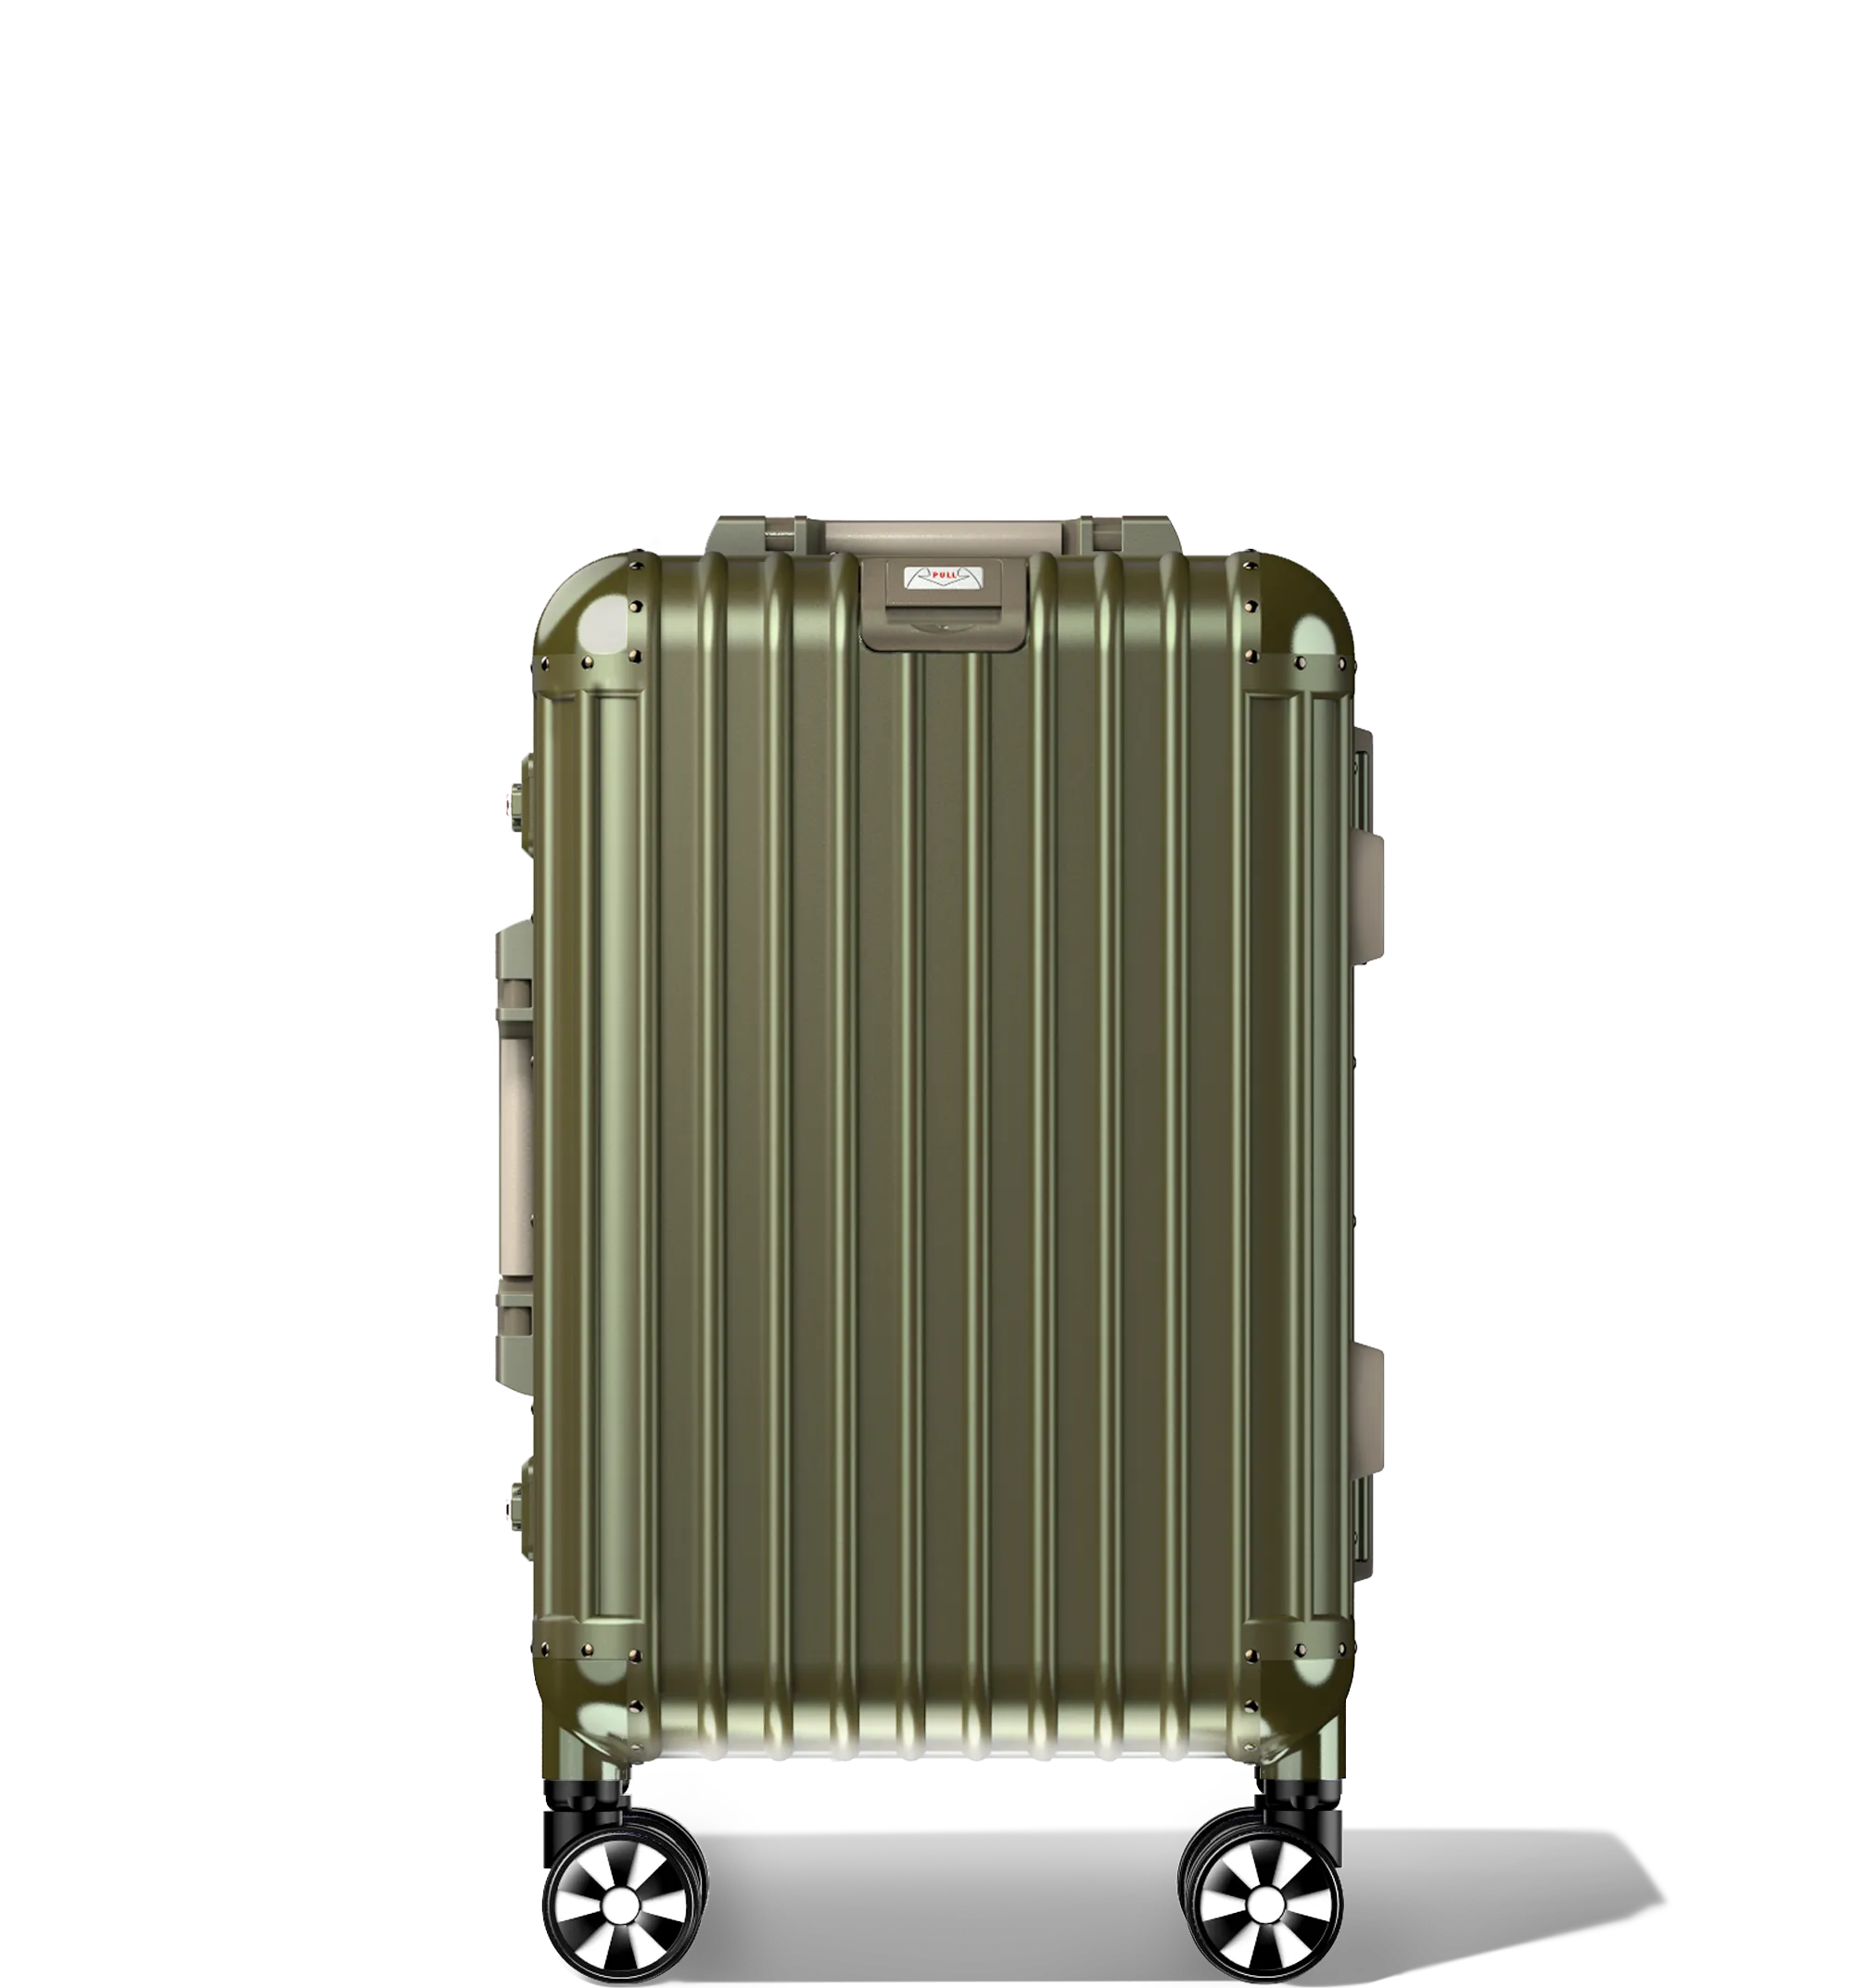 A Champagne metallic Cabin In 54/23 aluminium hard-shell Luggage standing vertically, featuring a ribbed design, a branded logo plate at the top, reinforced corner protectors, and four multi-directional spinner wheels, displayed against a white background.